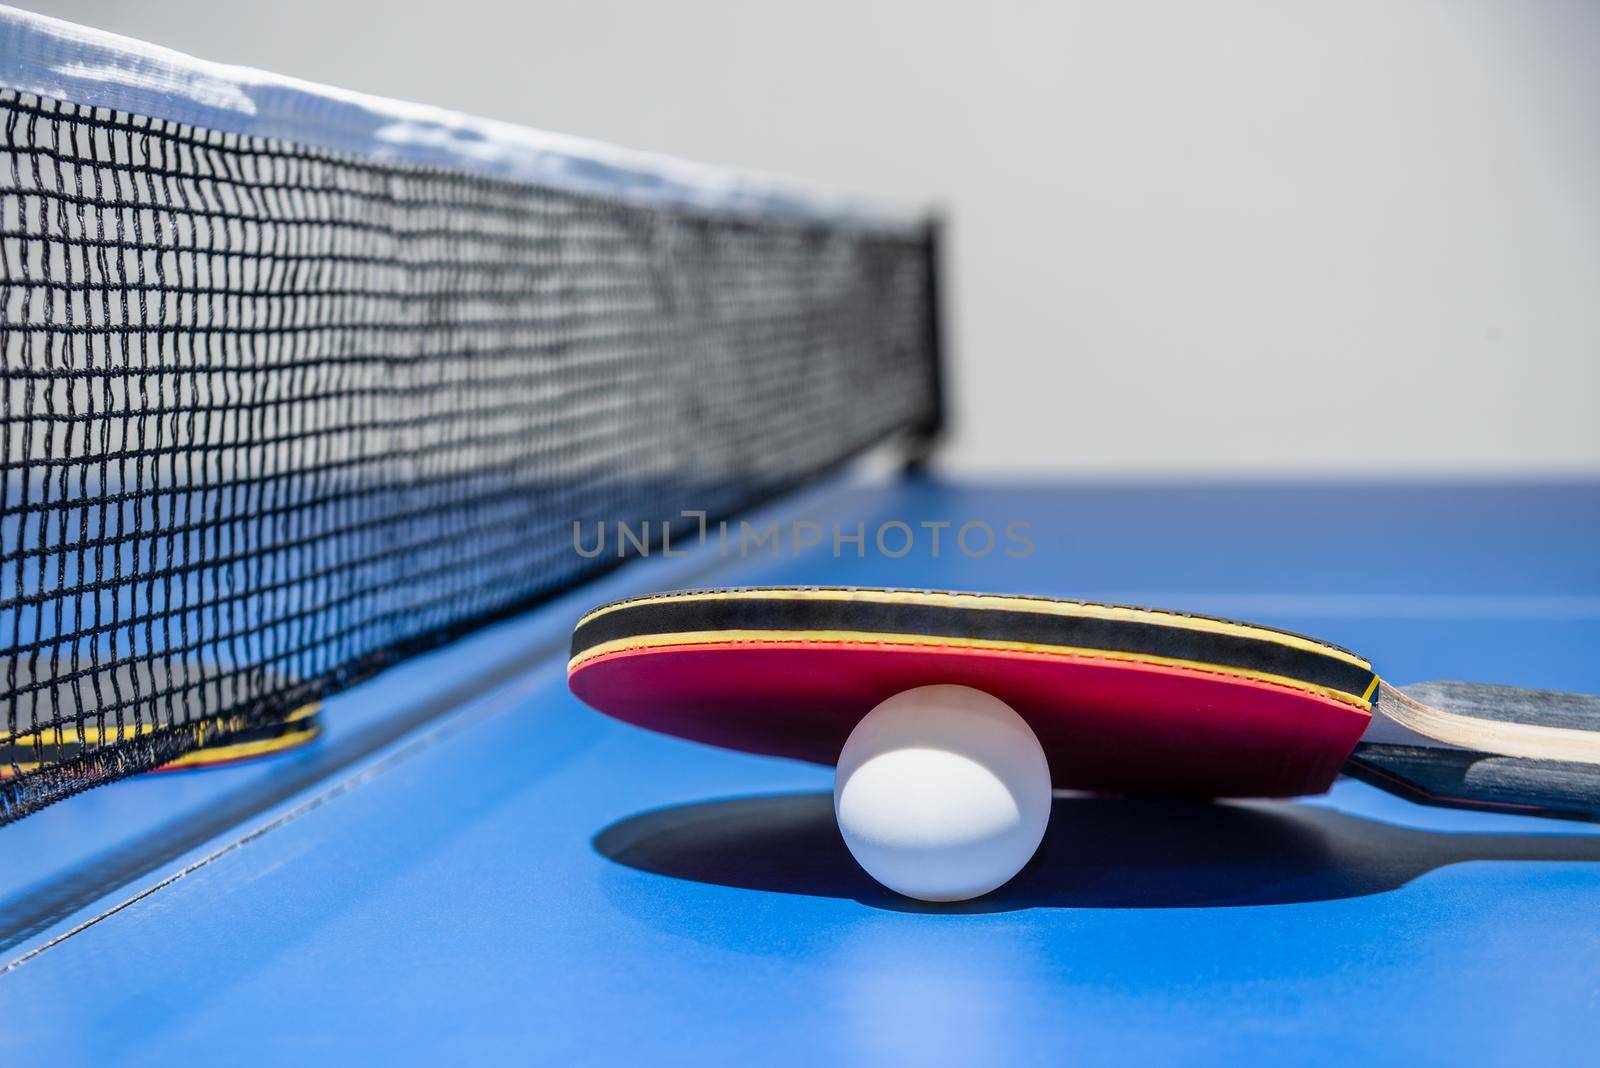 Closeup red table tennis racket and a white ball on the blue ping pong table with a black net, Table tennis paddle is a sports competition equipment indoor activity and exercise for concept background